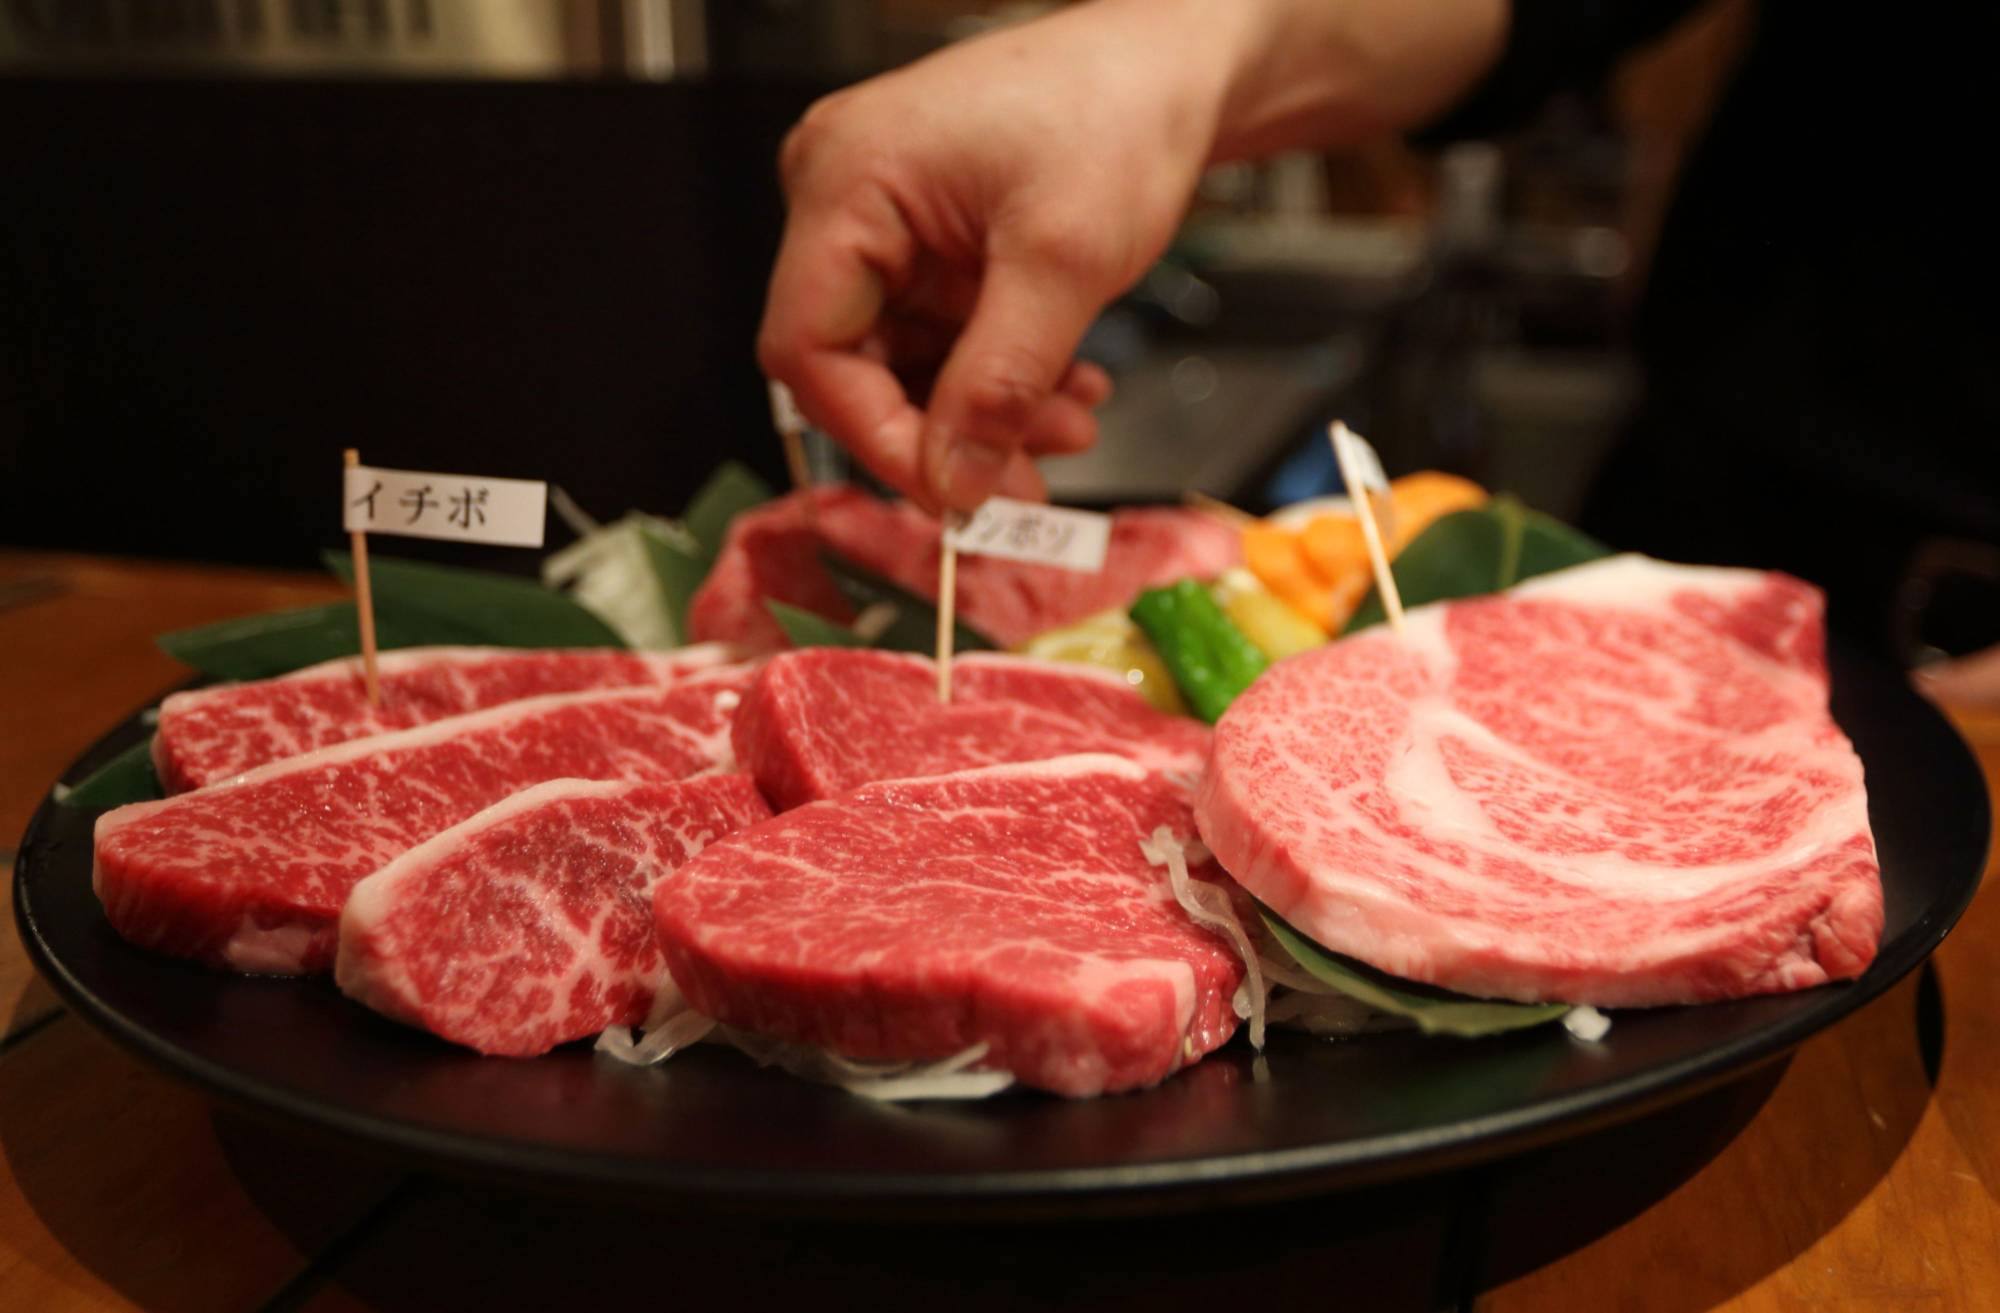 What Japan’s iconic beef can teach us about ‘soft power’